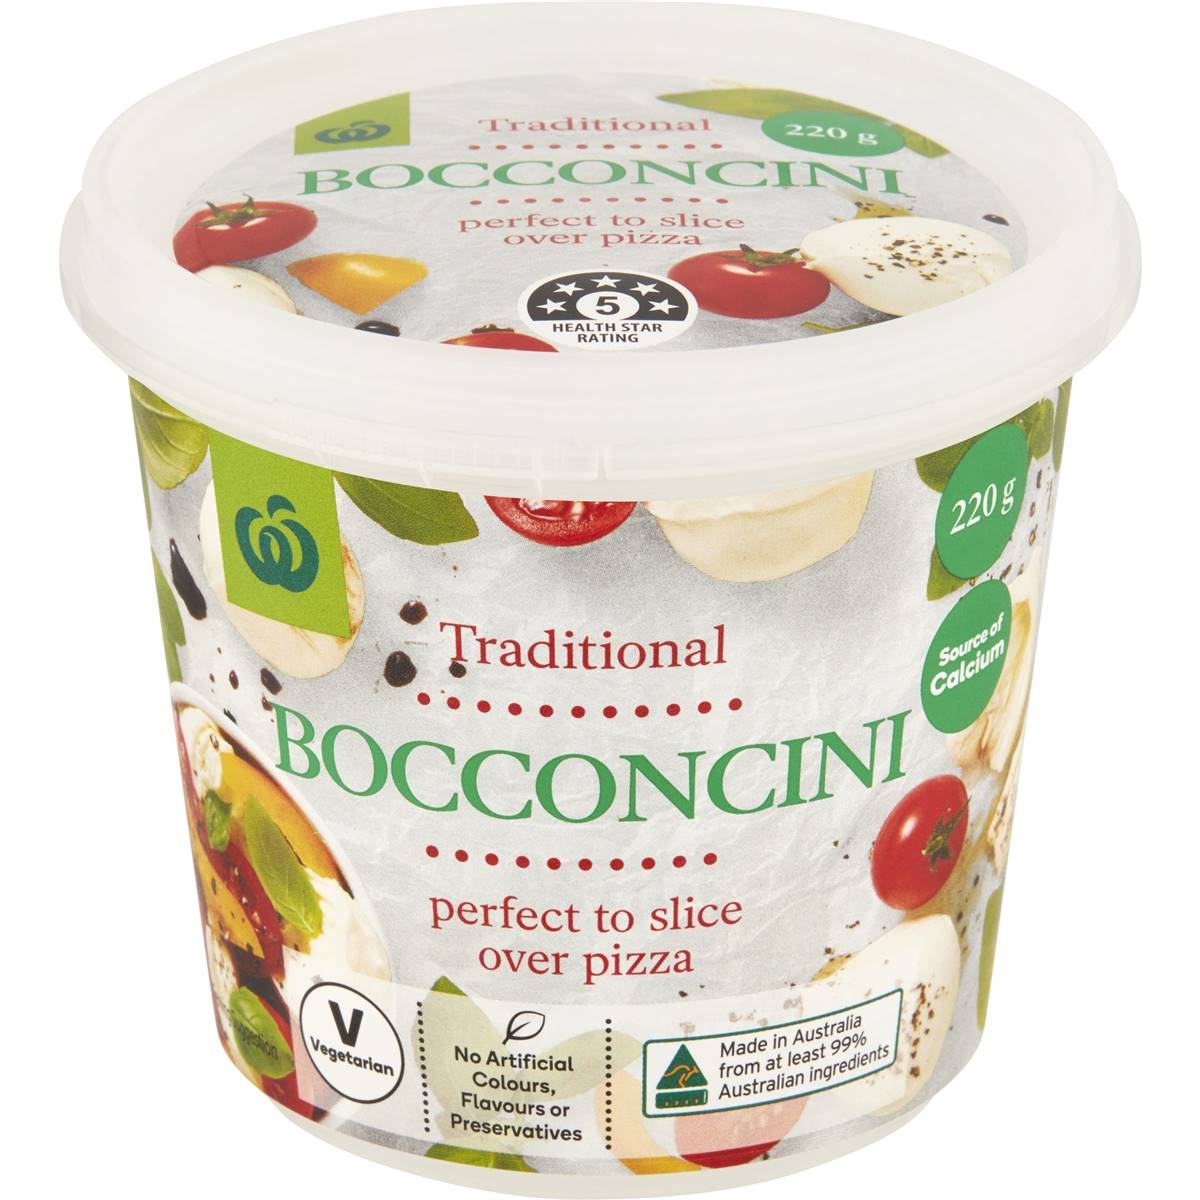 Calories in Woolworths Traditional Bocconcini